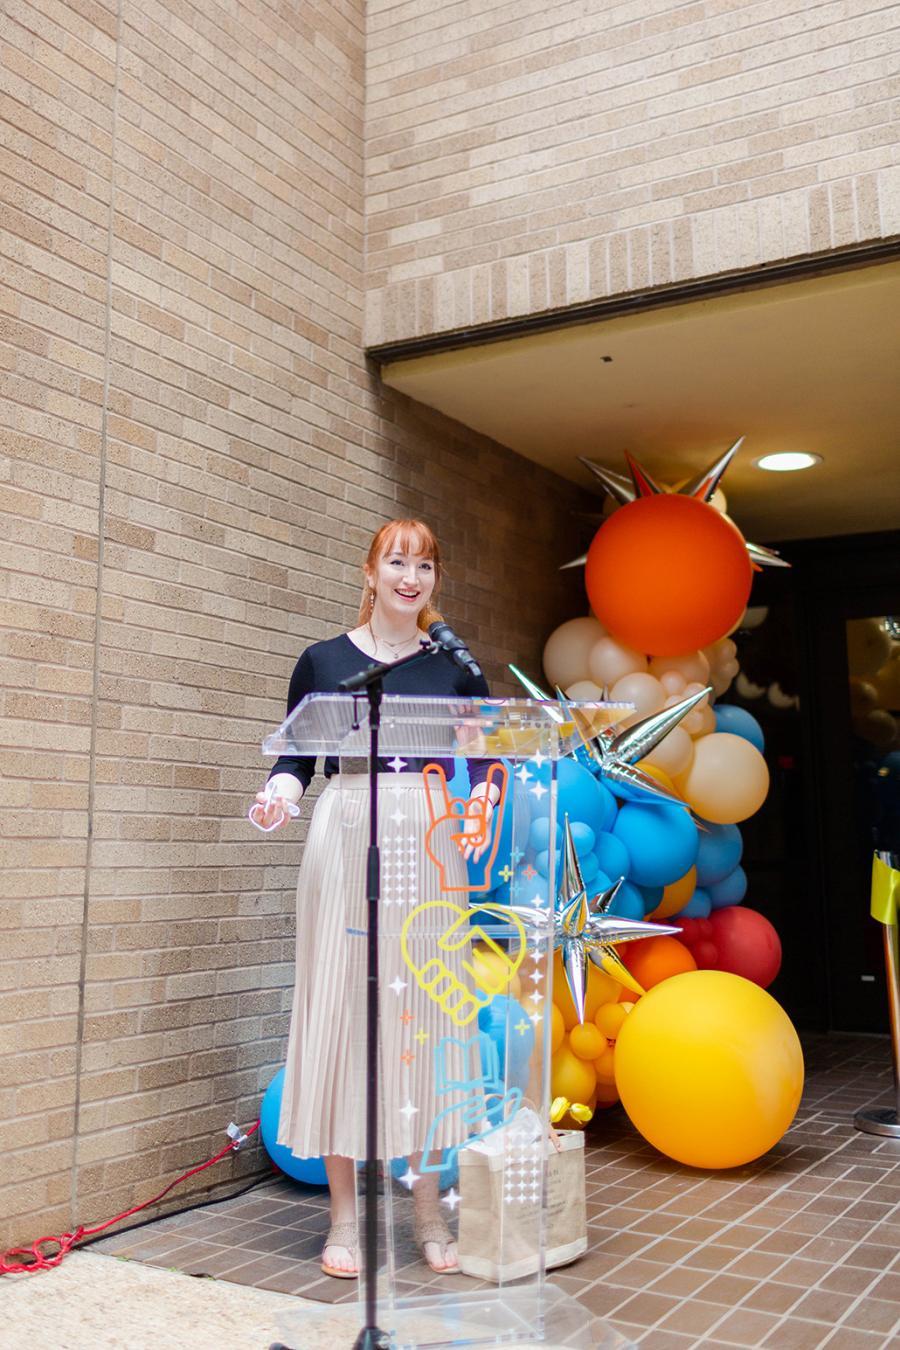 Recent Design graduate Jessica Sutherland speaks at the opening of the new Kendra Scott Center. Sutherland served on the KS WEL Institute's Student Advisory Board, worked as an intern and continues her design work for the program. Photo by Sarah Wong